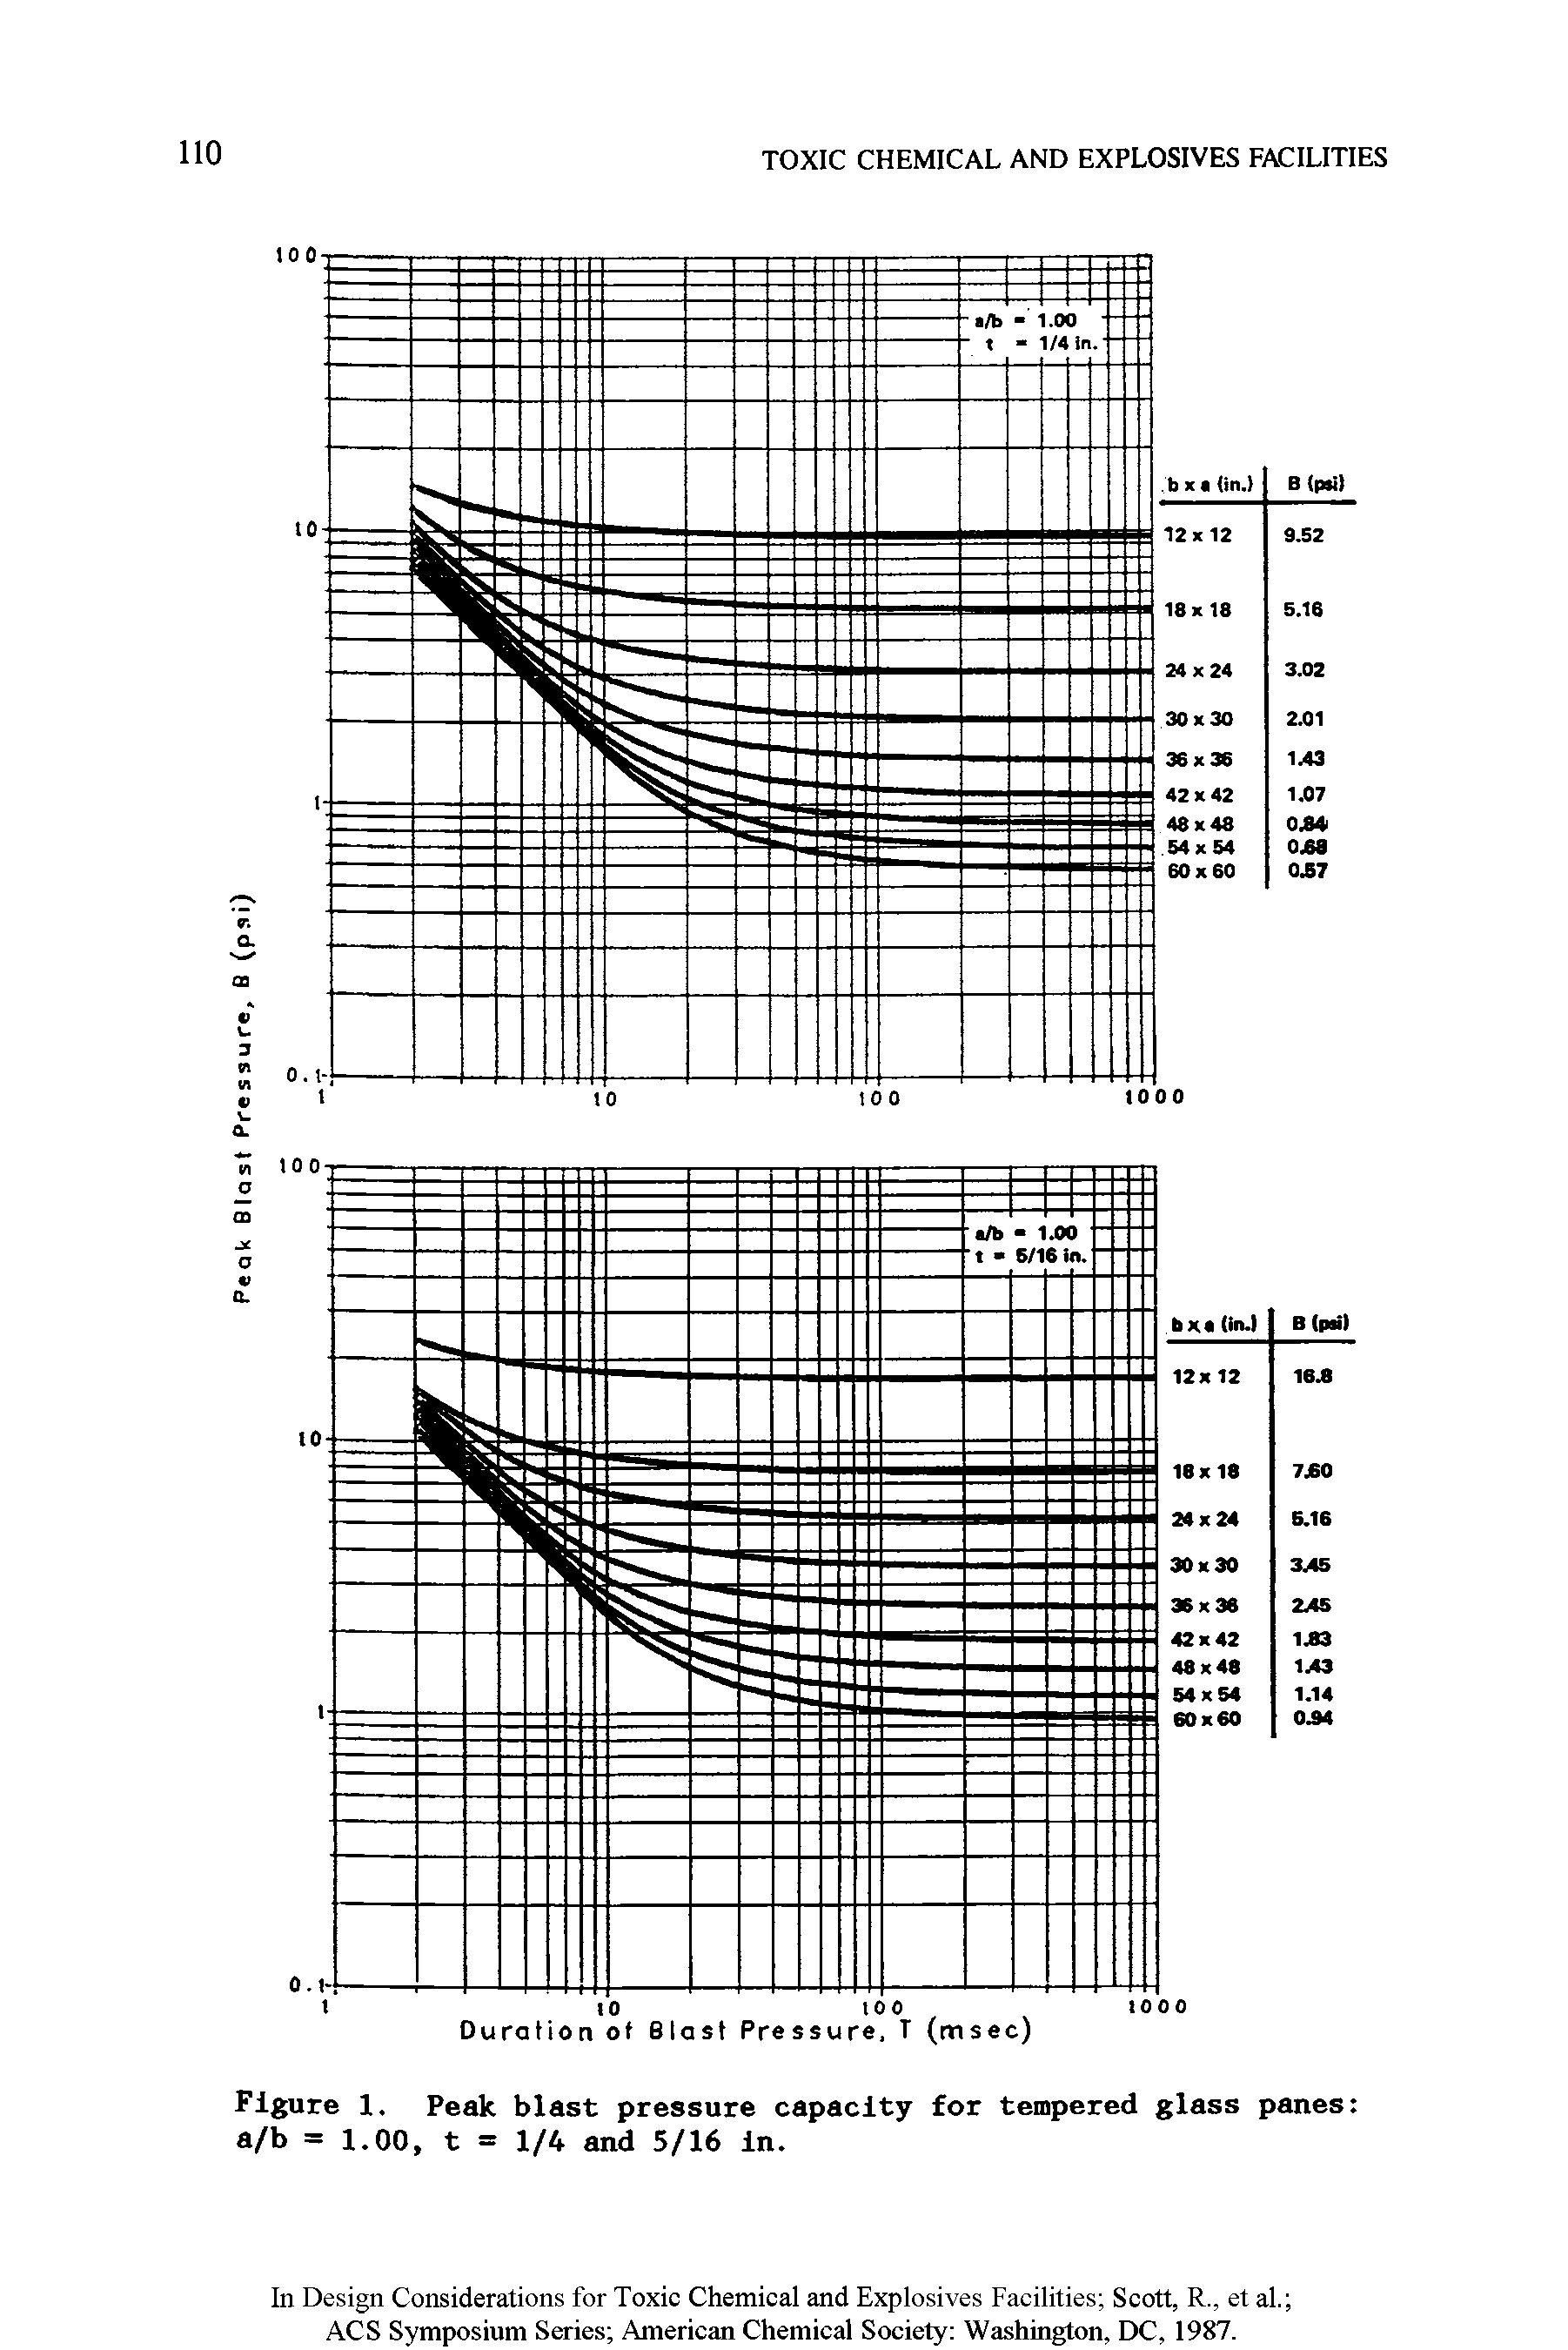 Figure 1. Peak blast pressure capacity for tempered glass panes a/b = 1.00, t = 1/4 and 5/16 in.